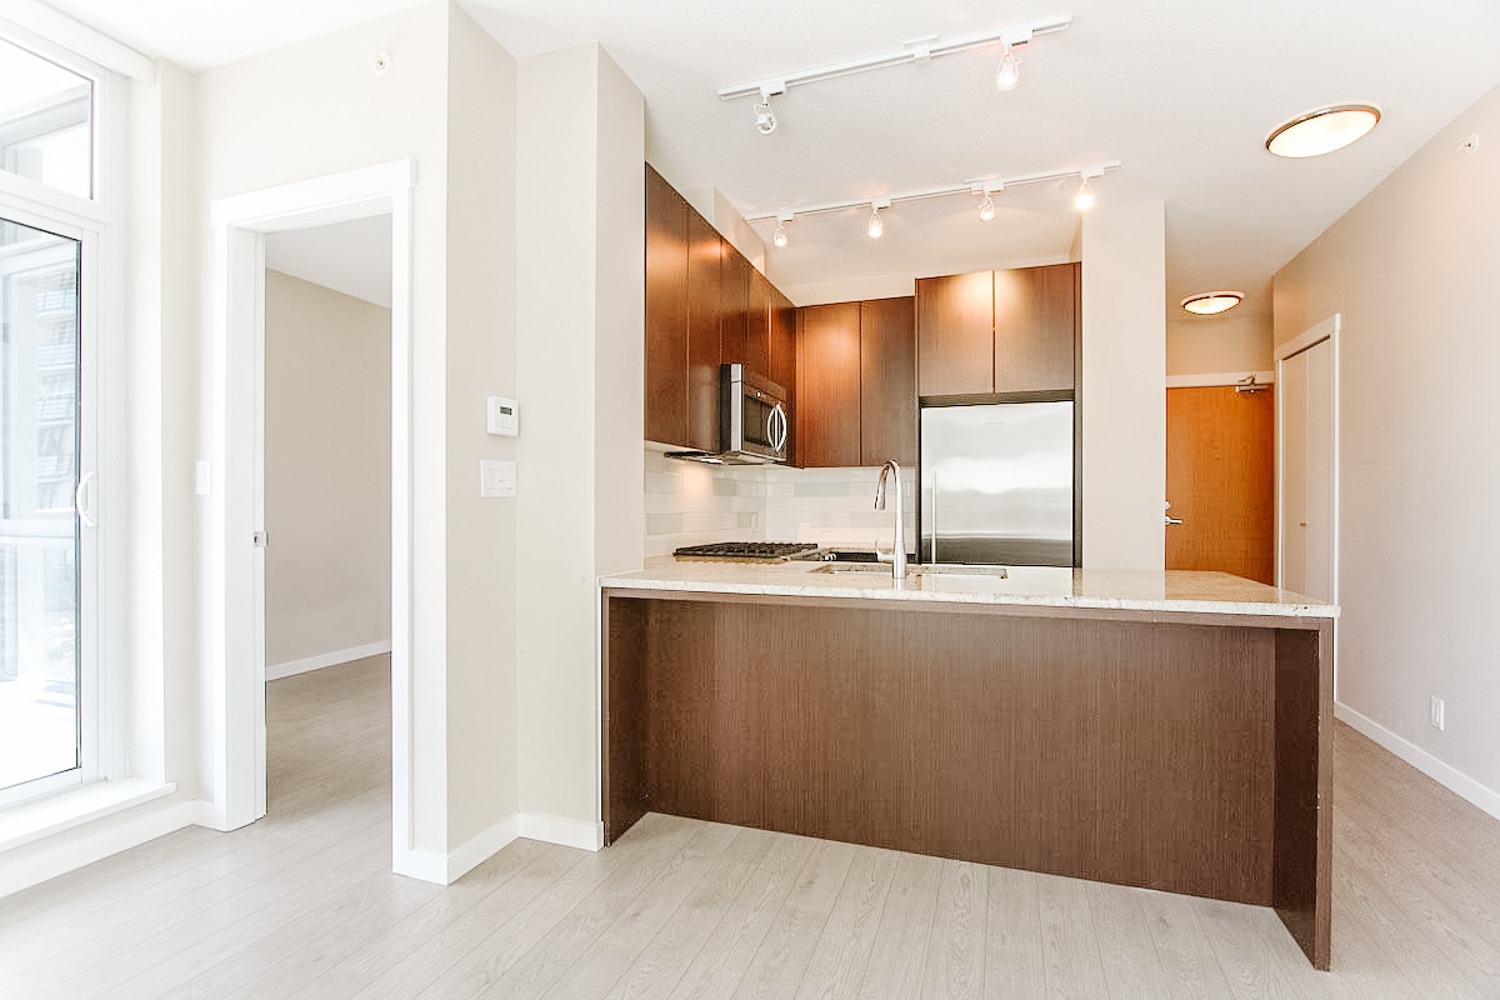 one-bedroom-condo-for-rent-in-lower-lonsdale-north-vancouver-8